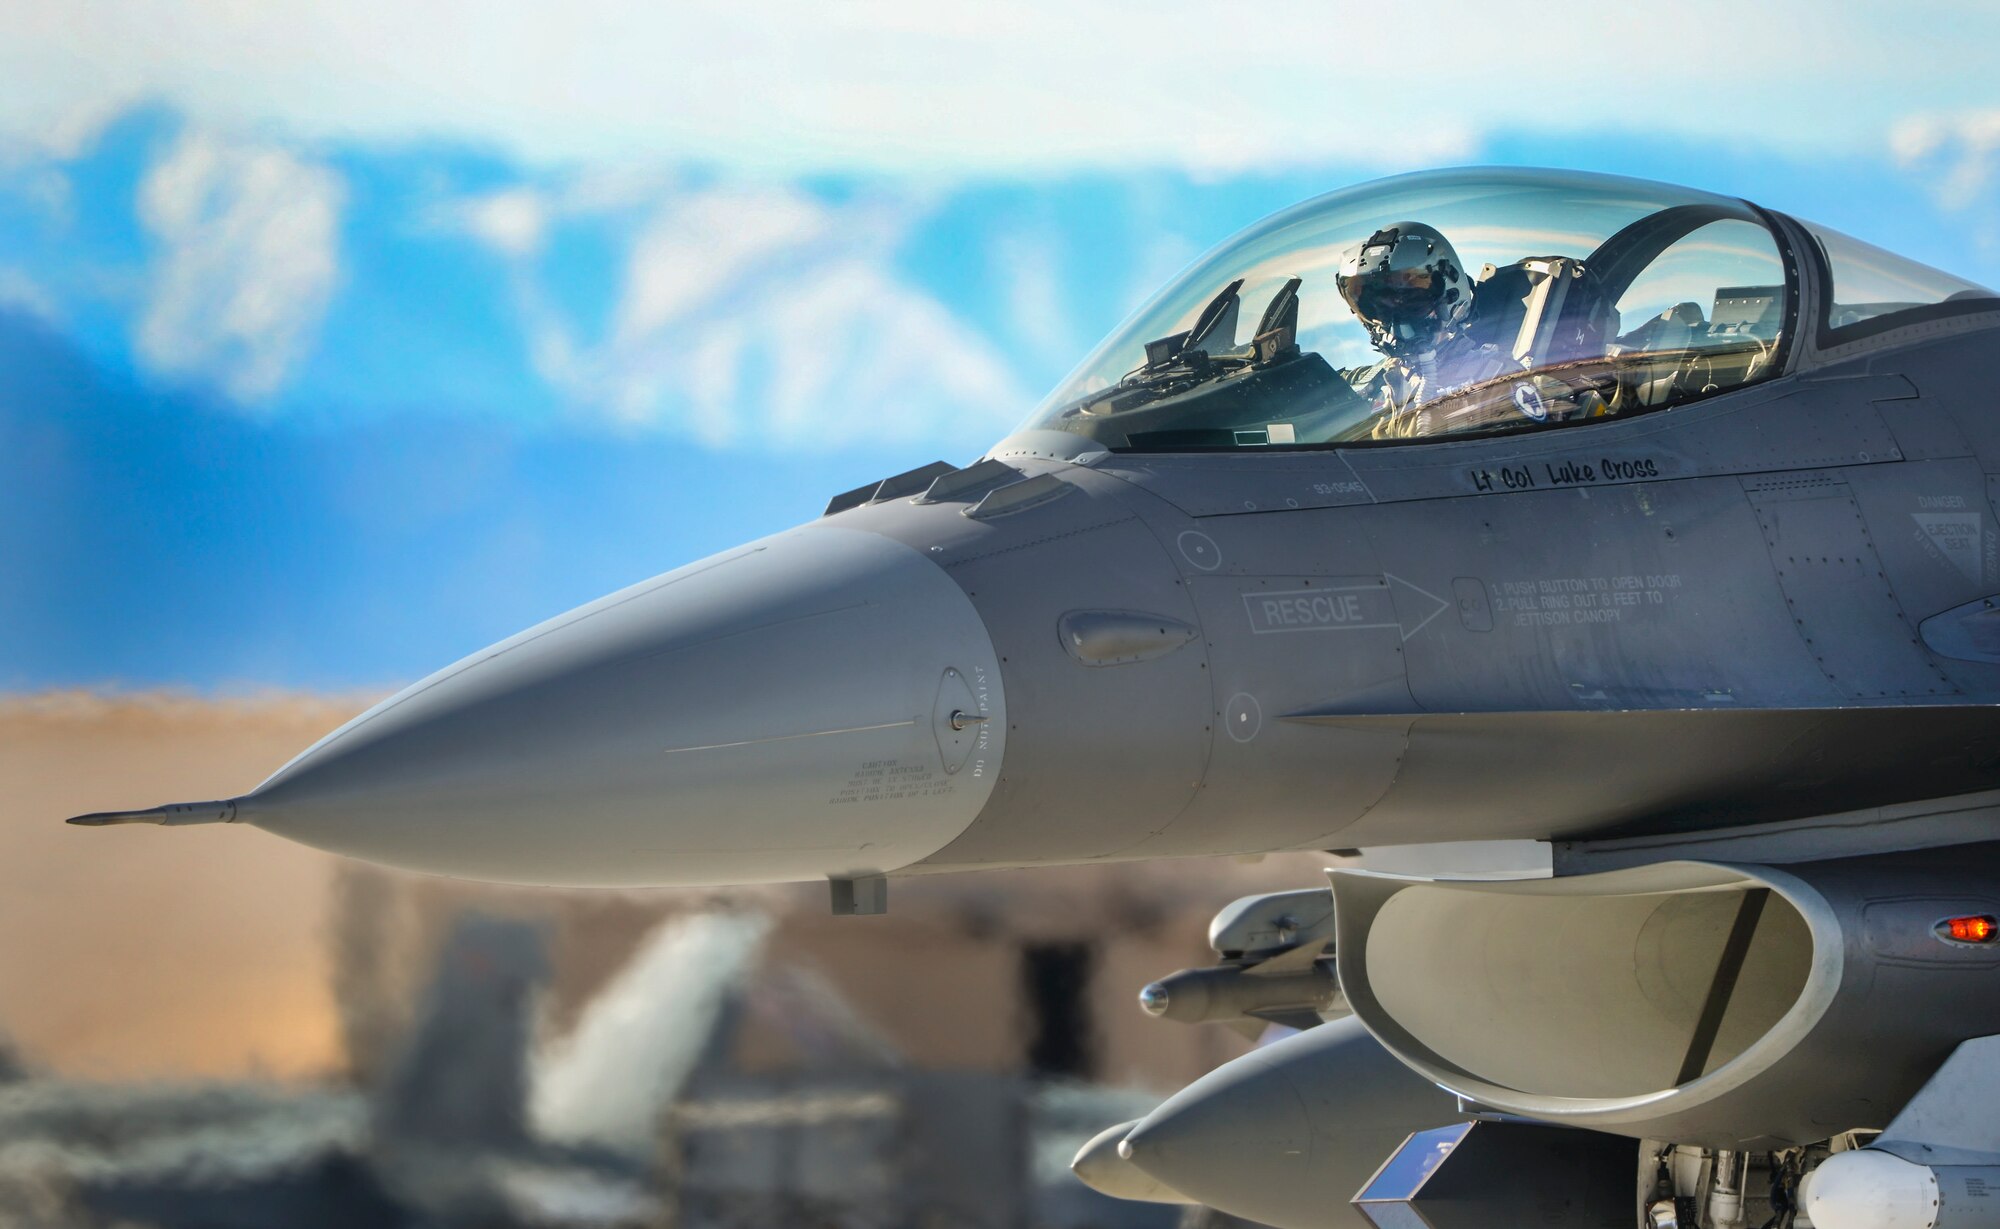 An F-16 Fighting Falcon pilot prepares for take-off during Red Flag 16-1 at Nellis Air Force Base, Nev., Jan. 25, 2016. Red Flag is a realistic combat exercise involving U.S. and allied air forces conducting training operations on the 15,000 square mile Nevada Test and Training Range. (U.S. Air Force photo by A1C Kevin Tanenbaum)